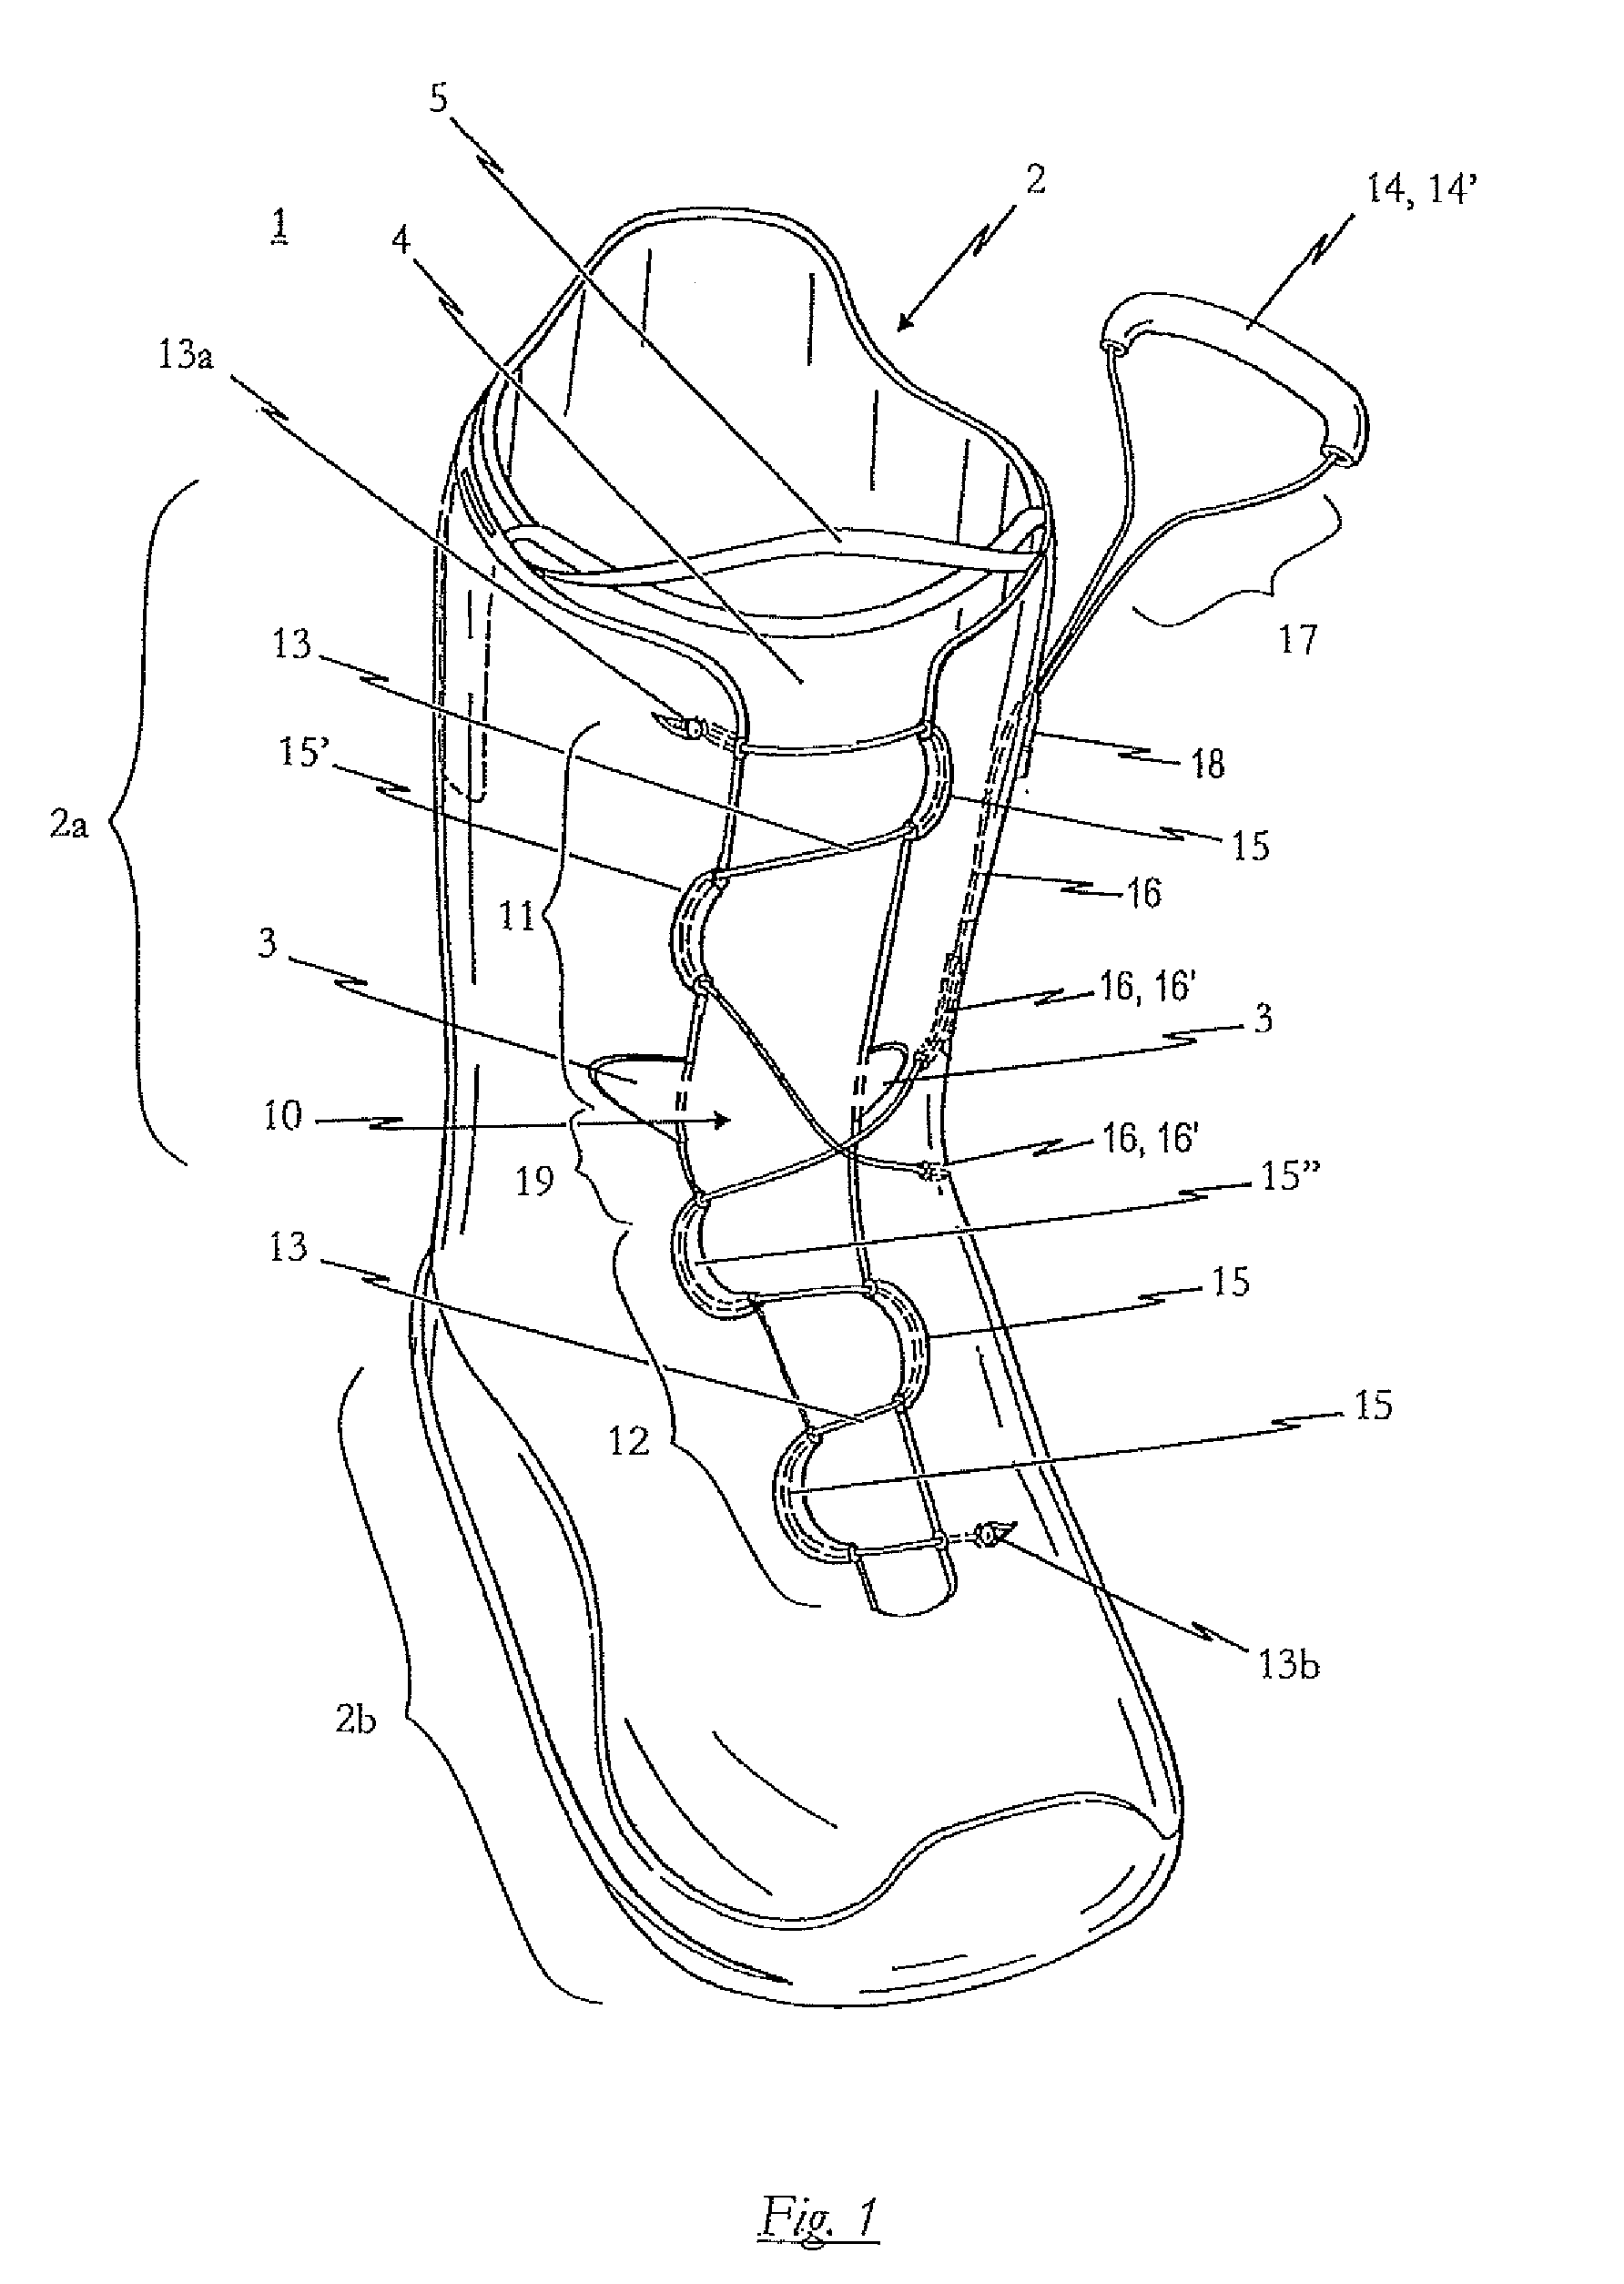 Boot in particular ski or snowboard boot